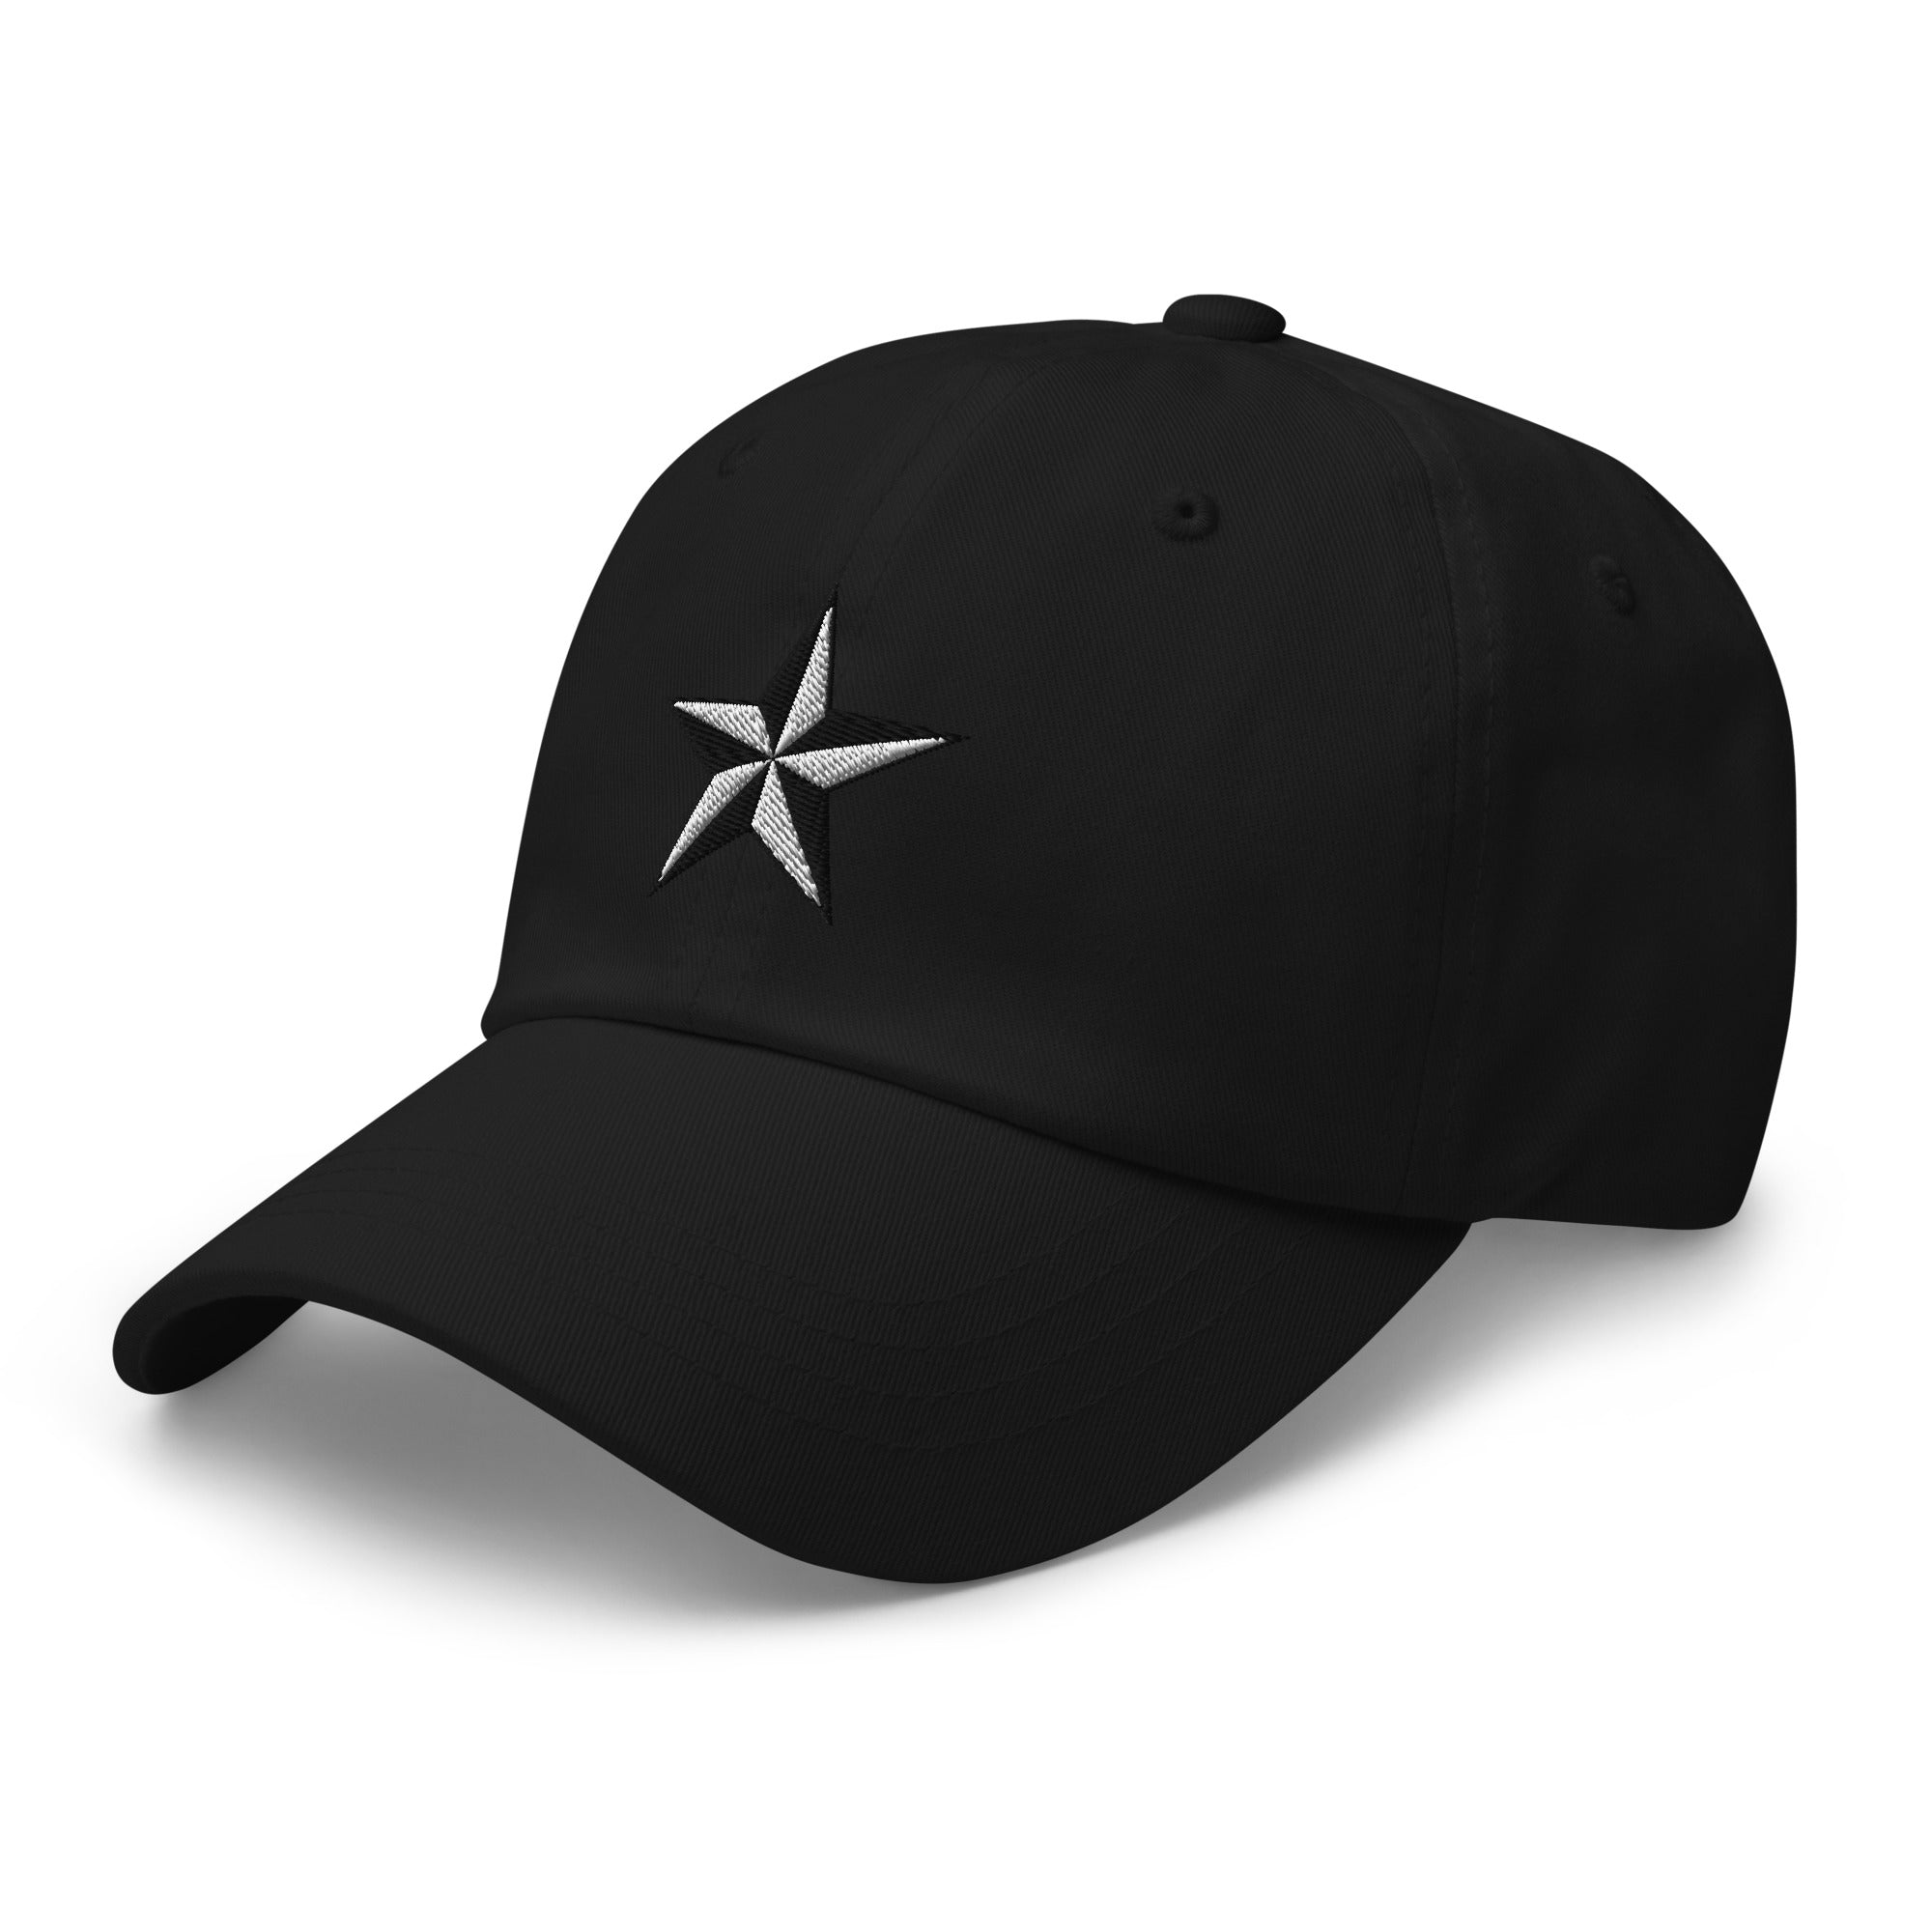 Nautical Star North Star Embroidered Baseball Cap Tattoo Style Ink Dad hat - Edge of Life Designs